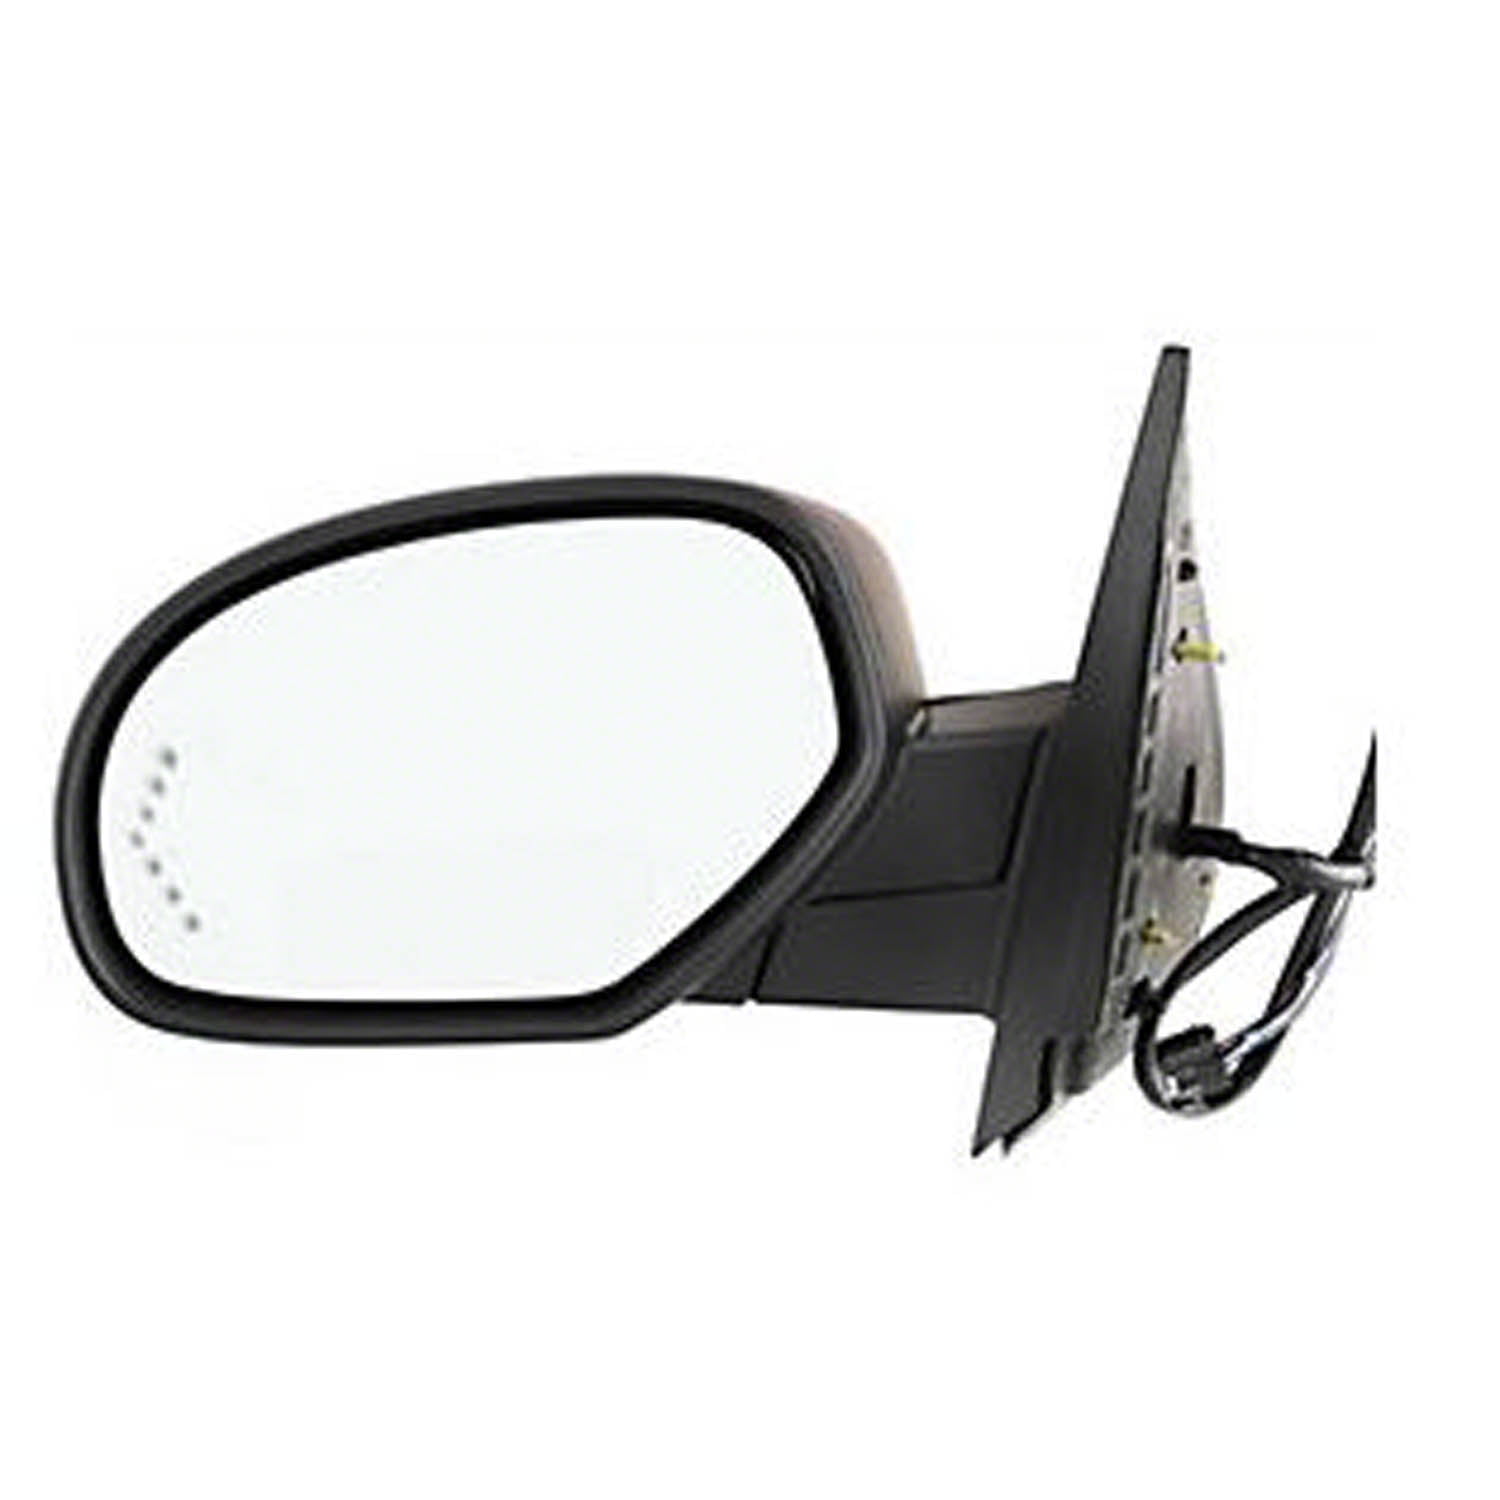 Aftermarket 2007-2014 Chevrolet Tahoe Driver Side Left Heat Signal Manual Folding Power Door 2007 Chevy Tahoe Driver Side Mirror Replacement